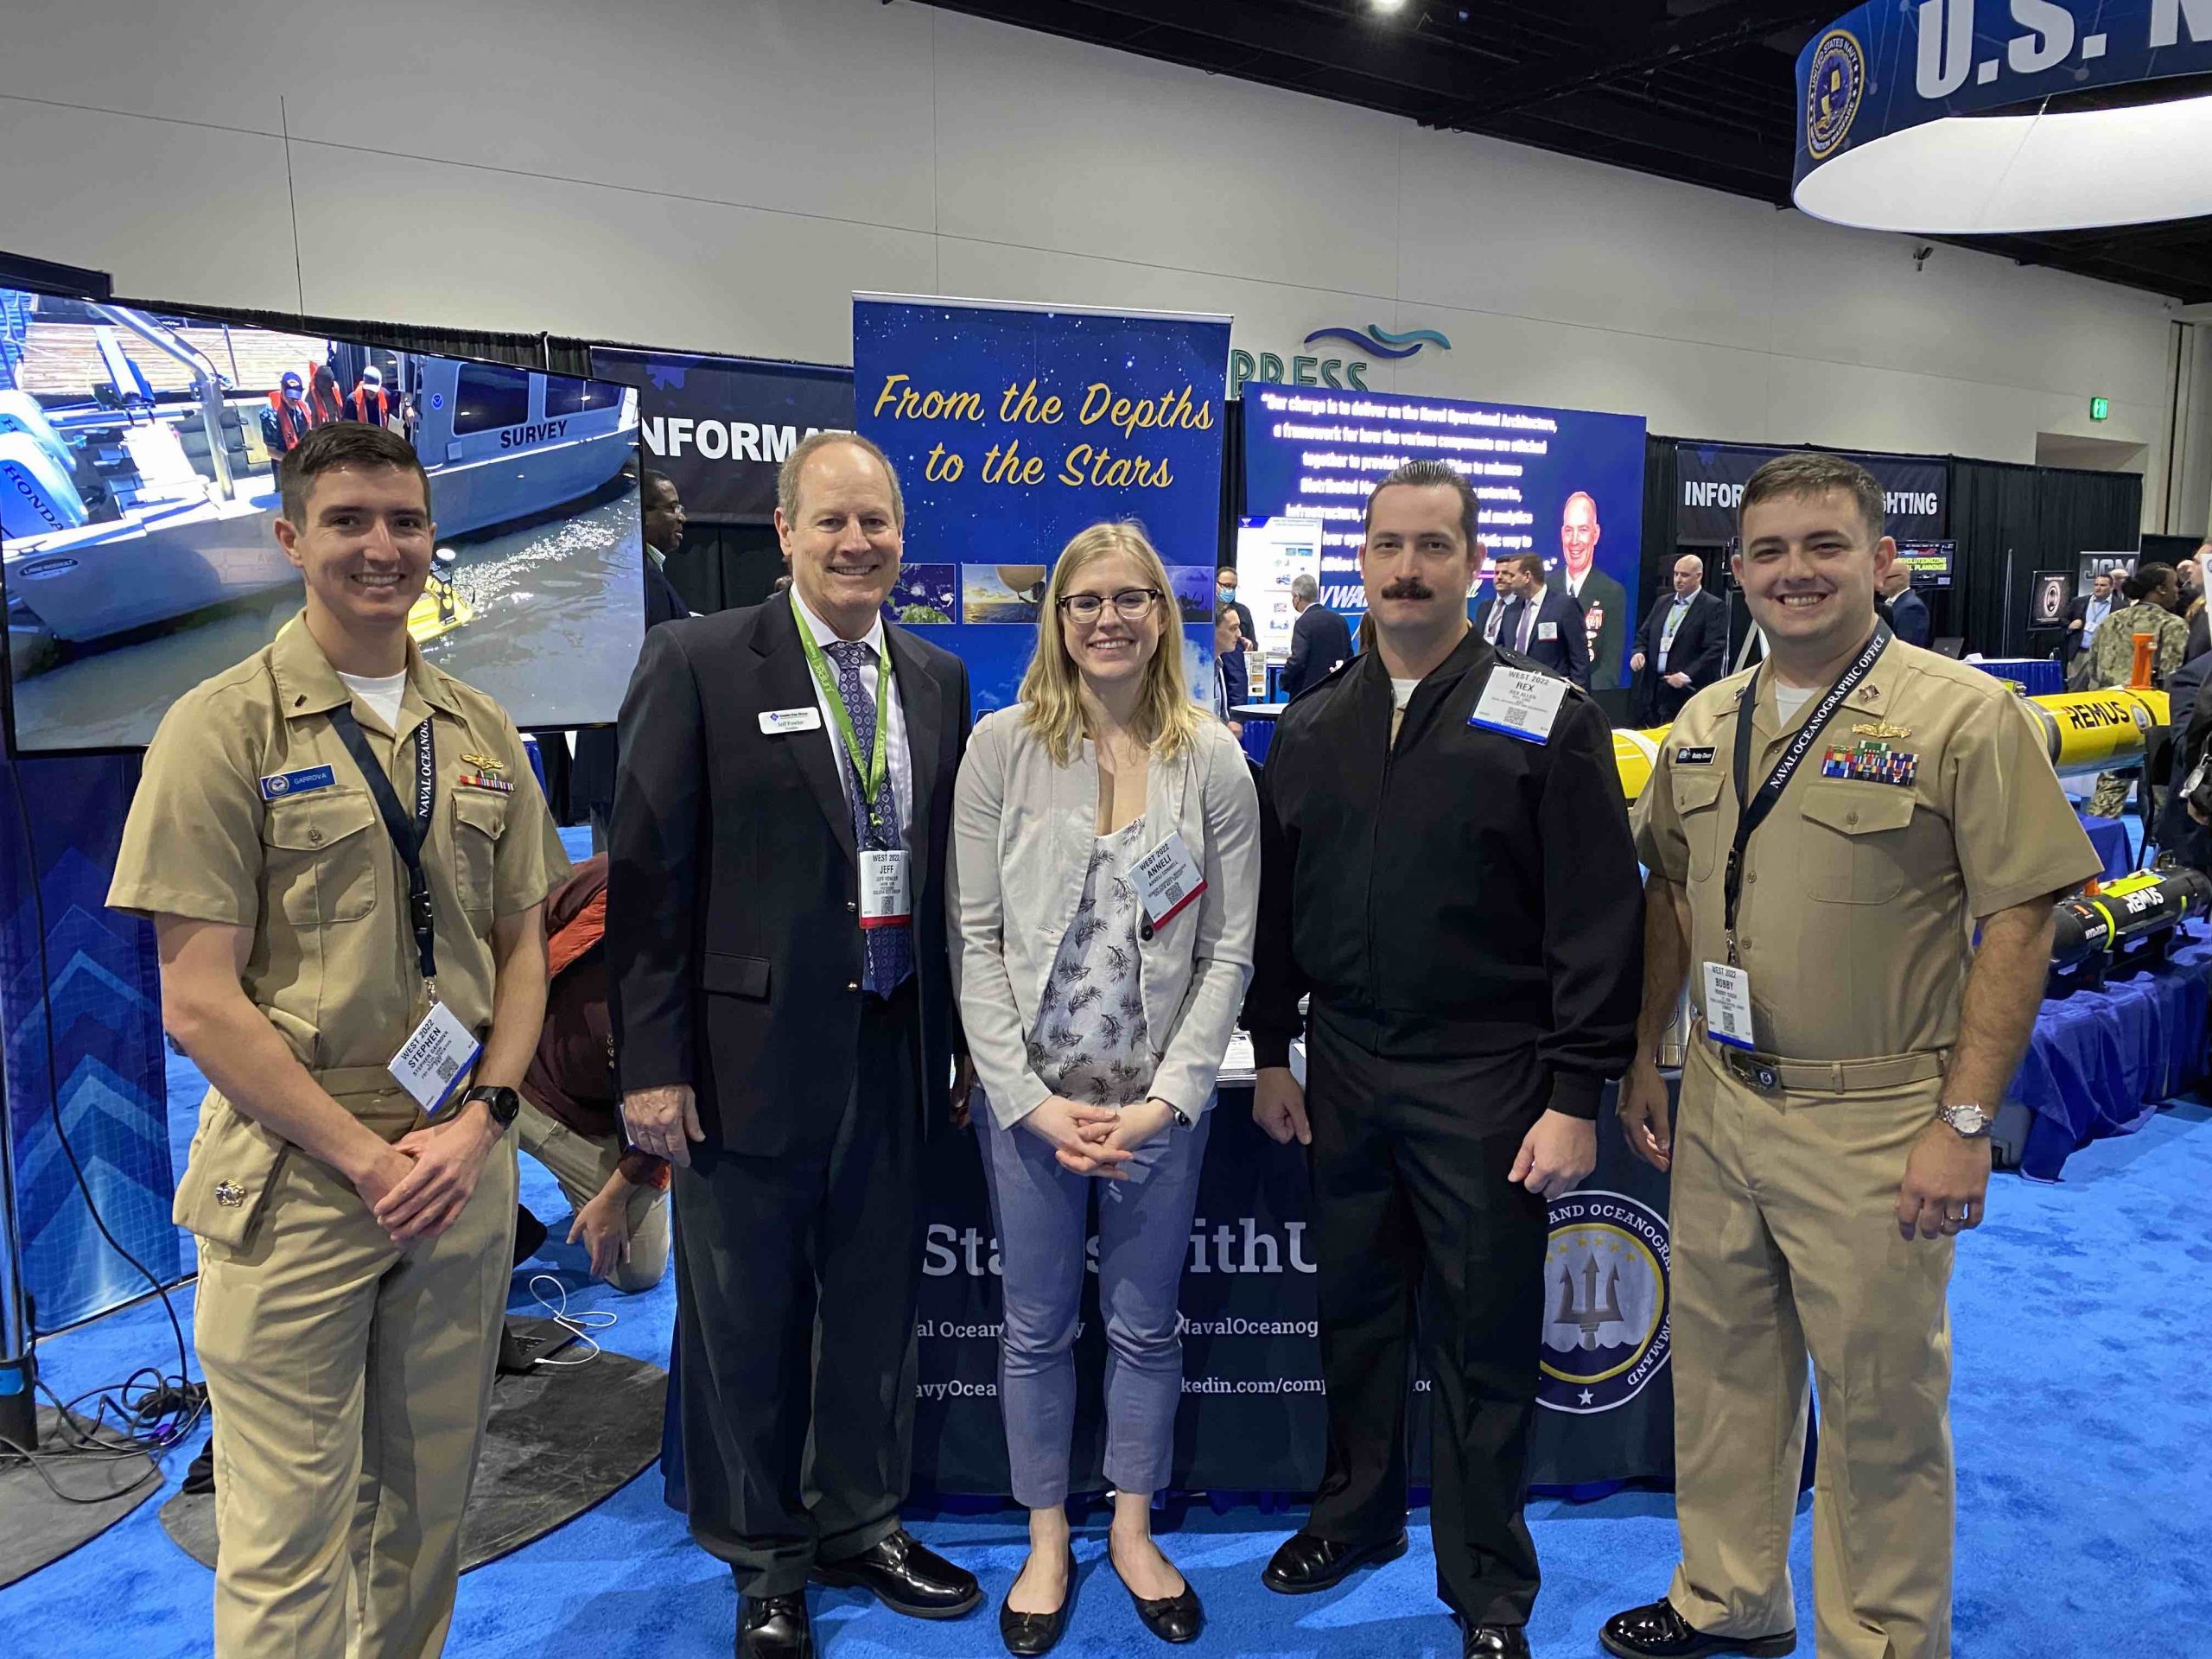 Five people posing at a Human Resources Operations exhibition booth with informational banners and a TV screen displaying a submarine.